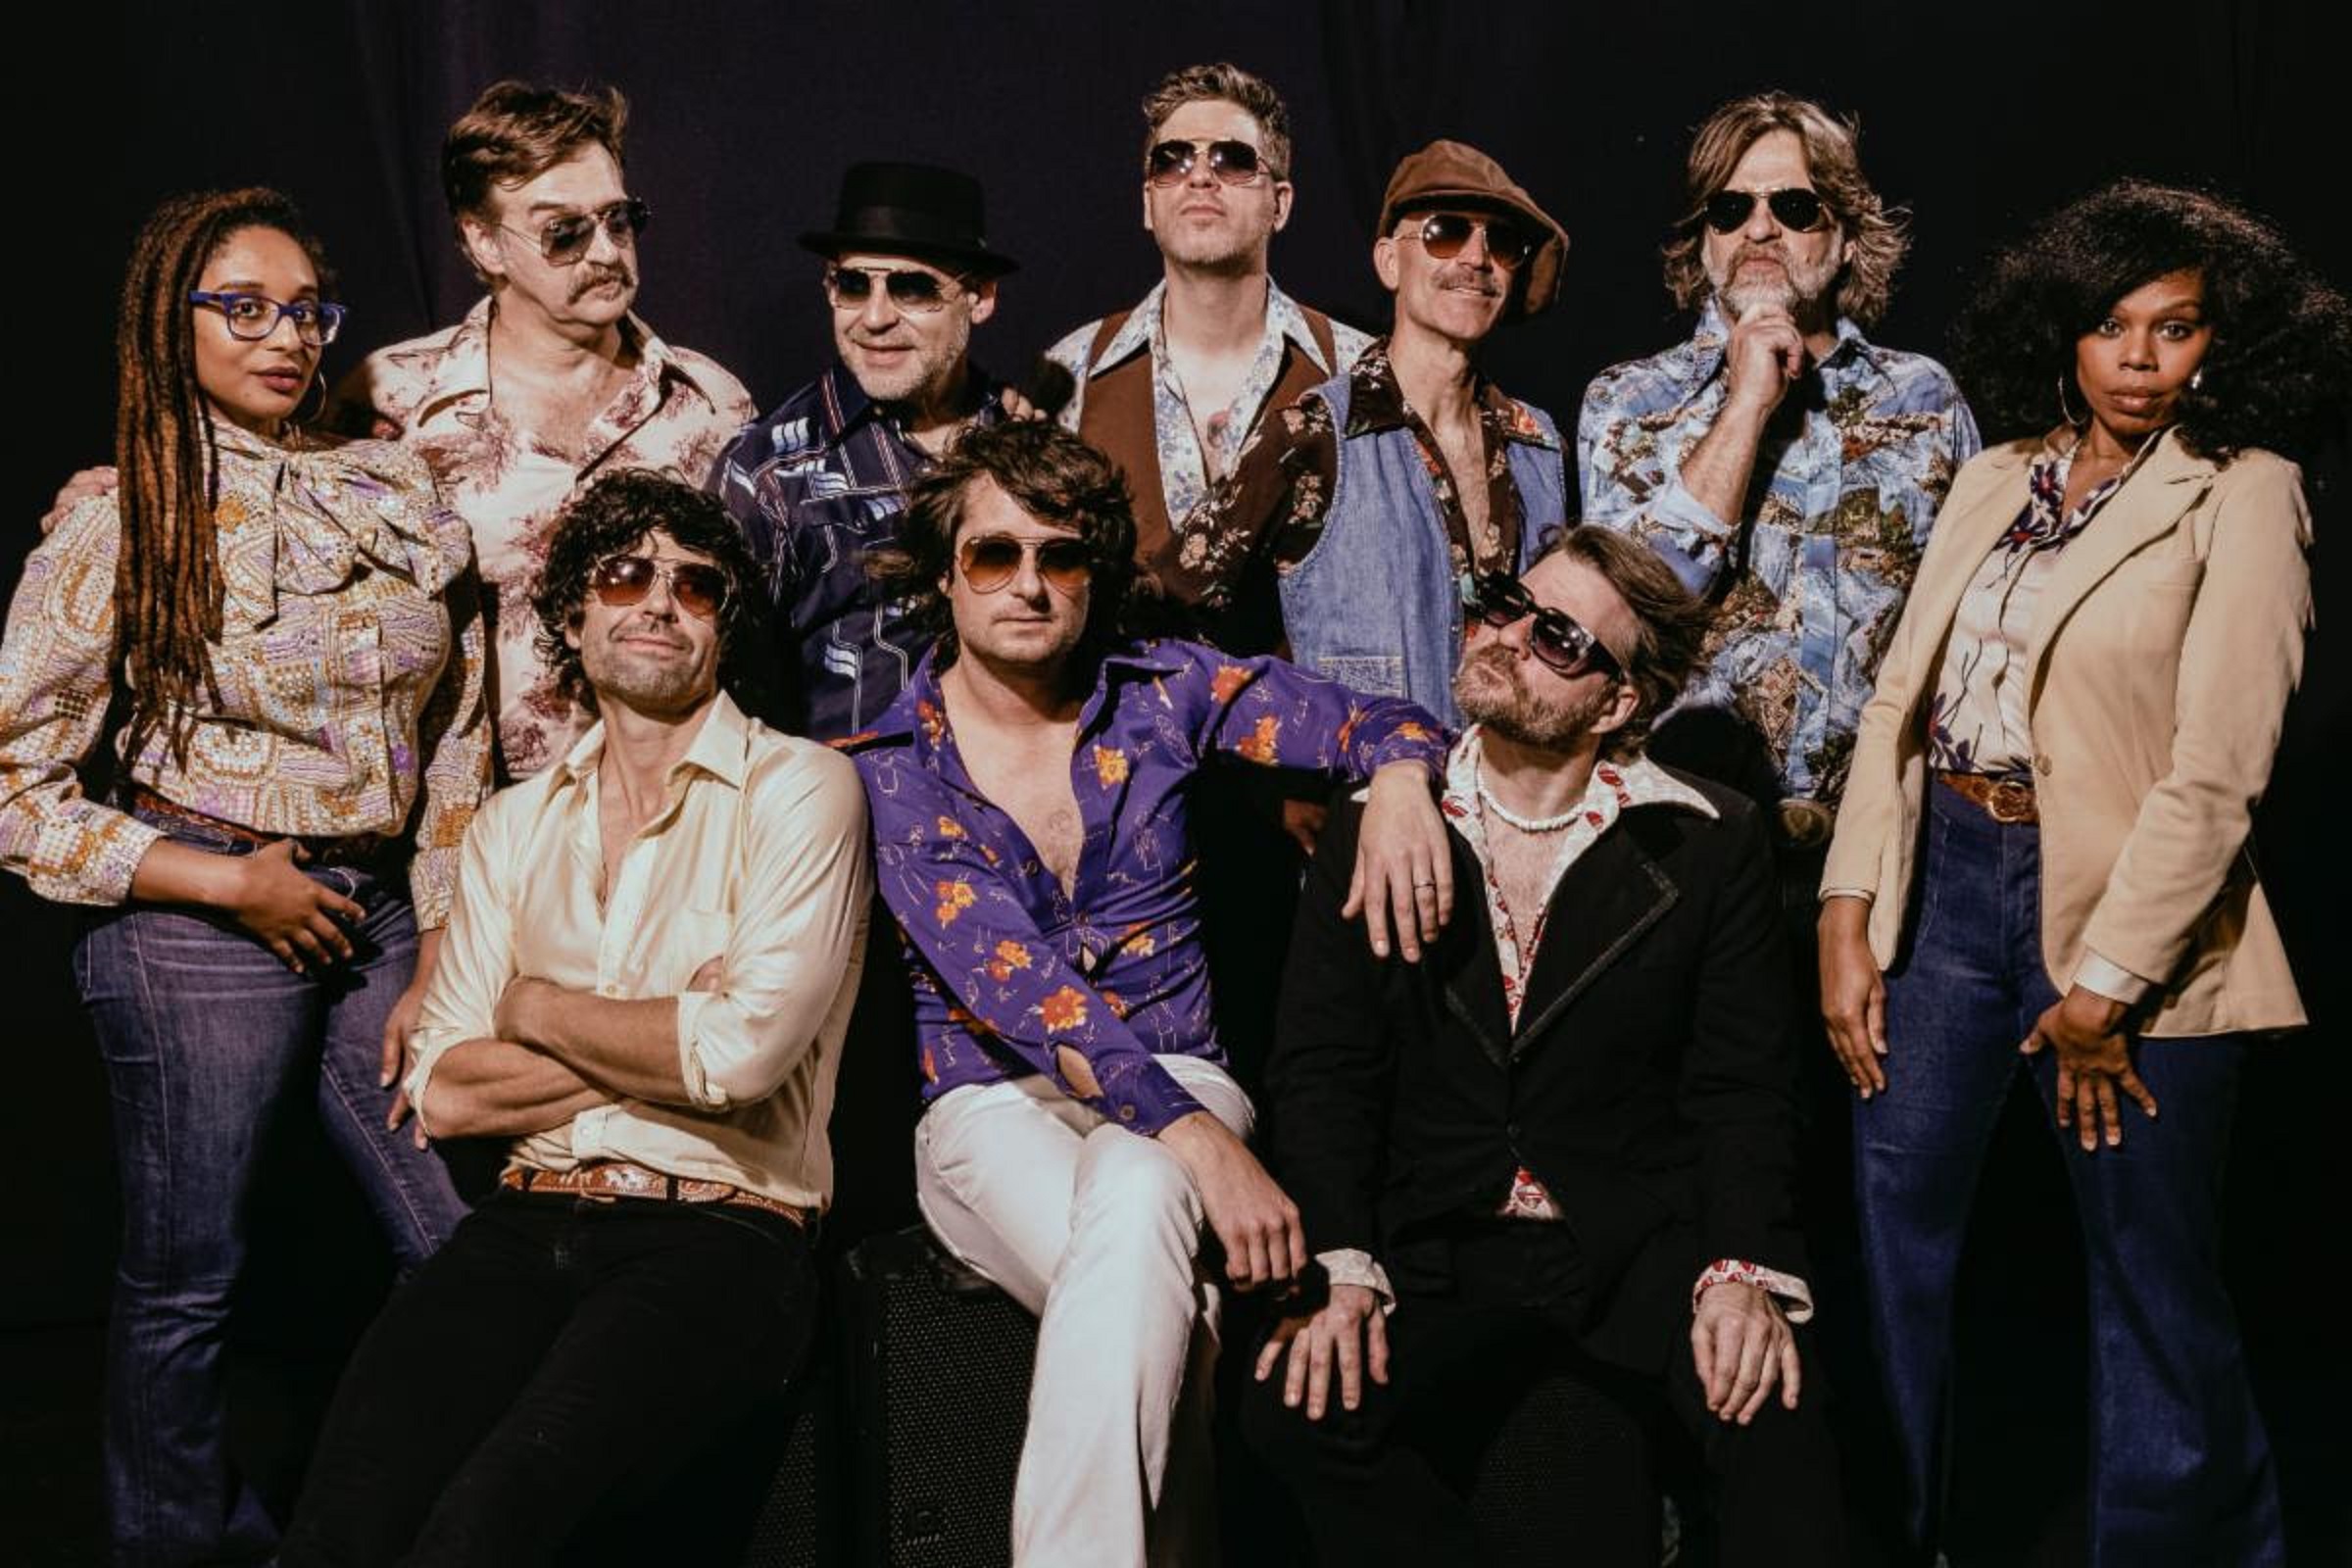 Yacht Rock Revue Announces Release of Two Original Singles (May 24)